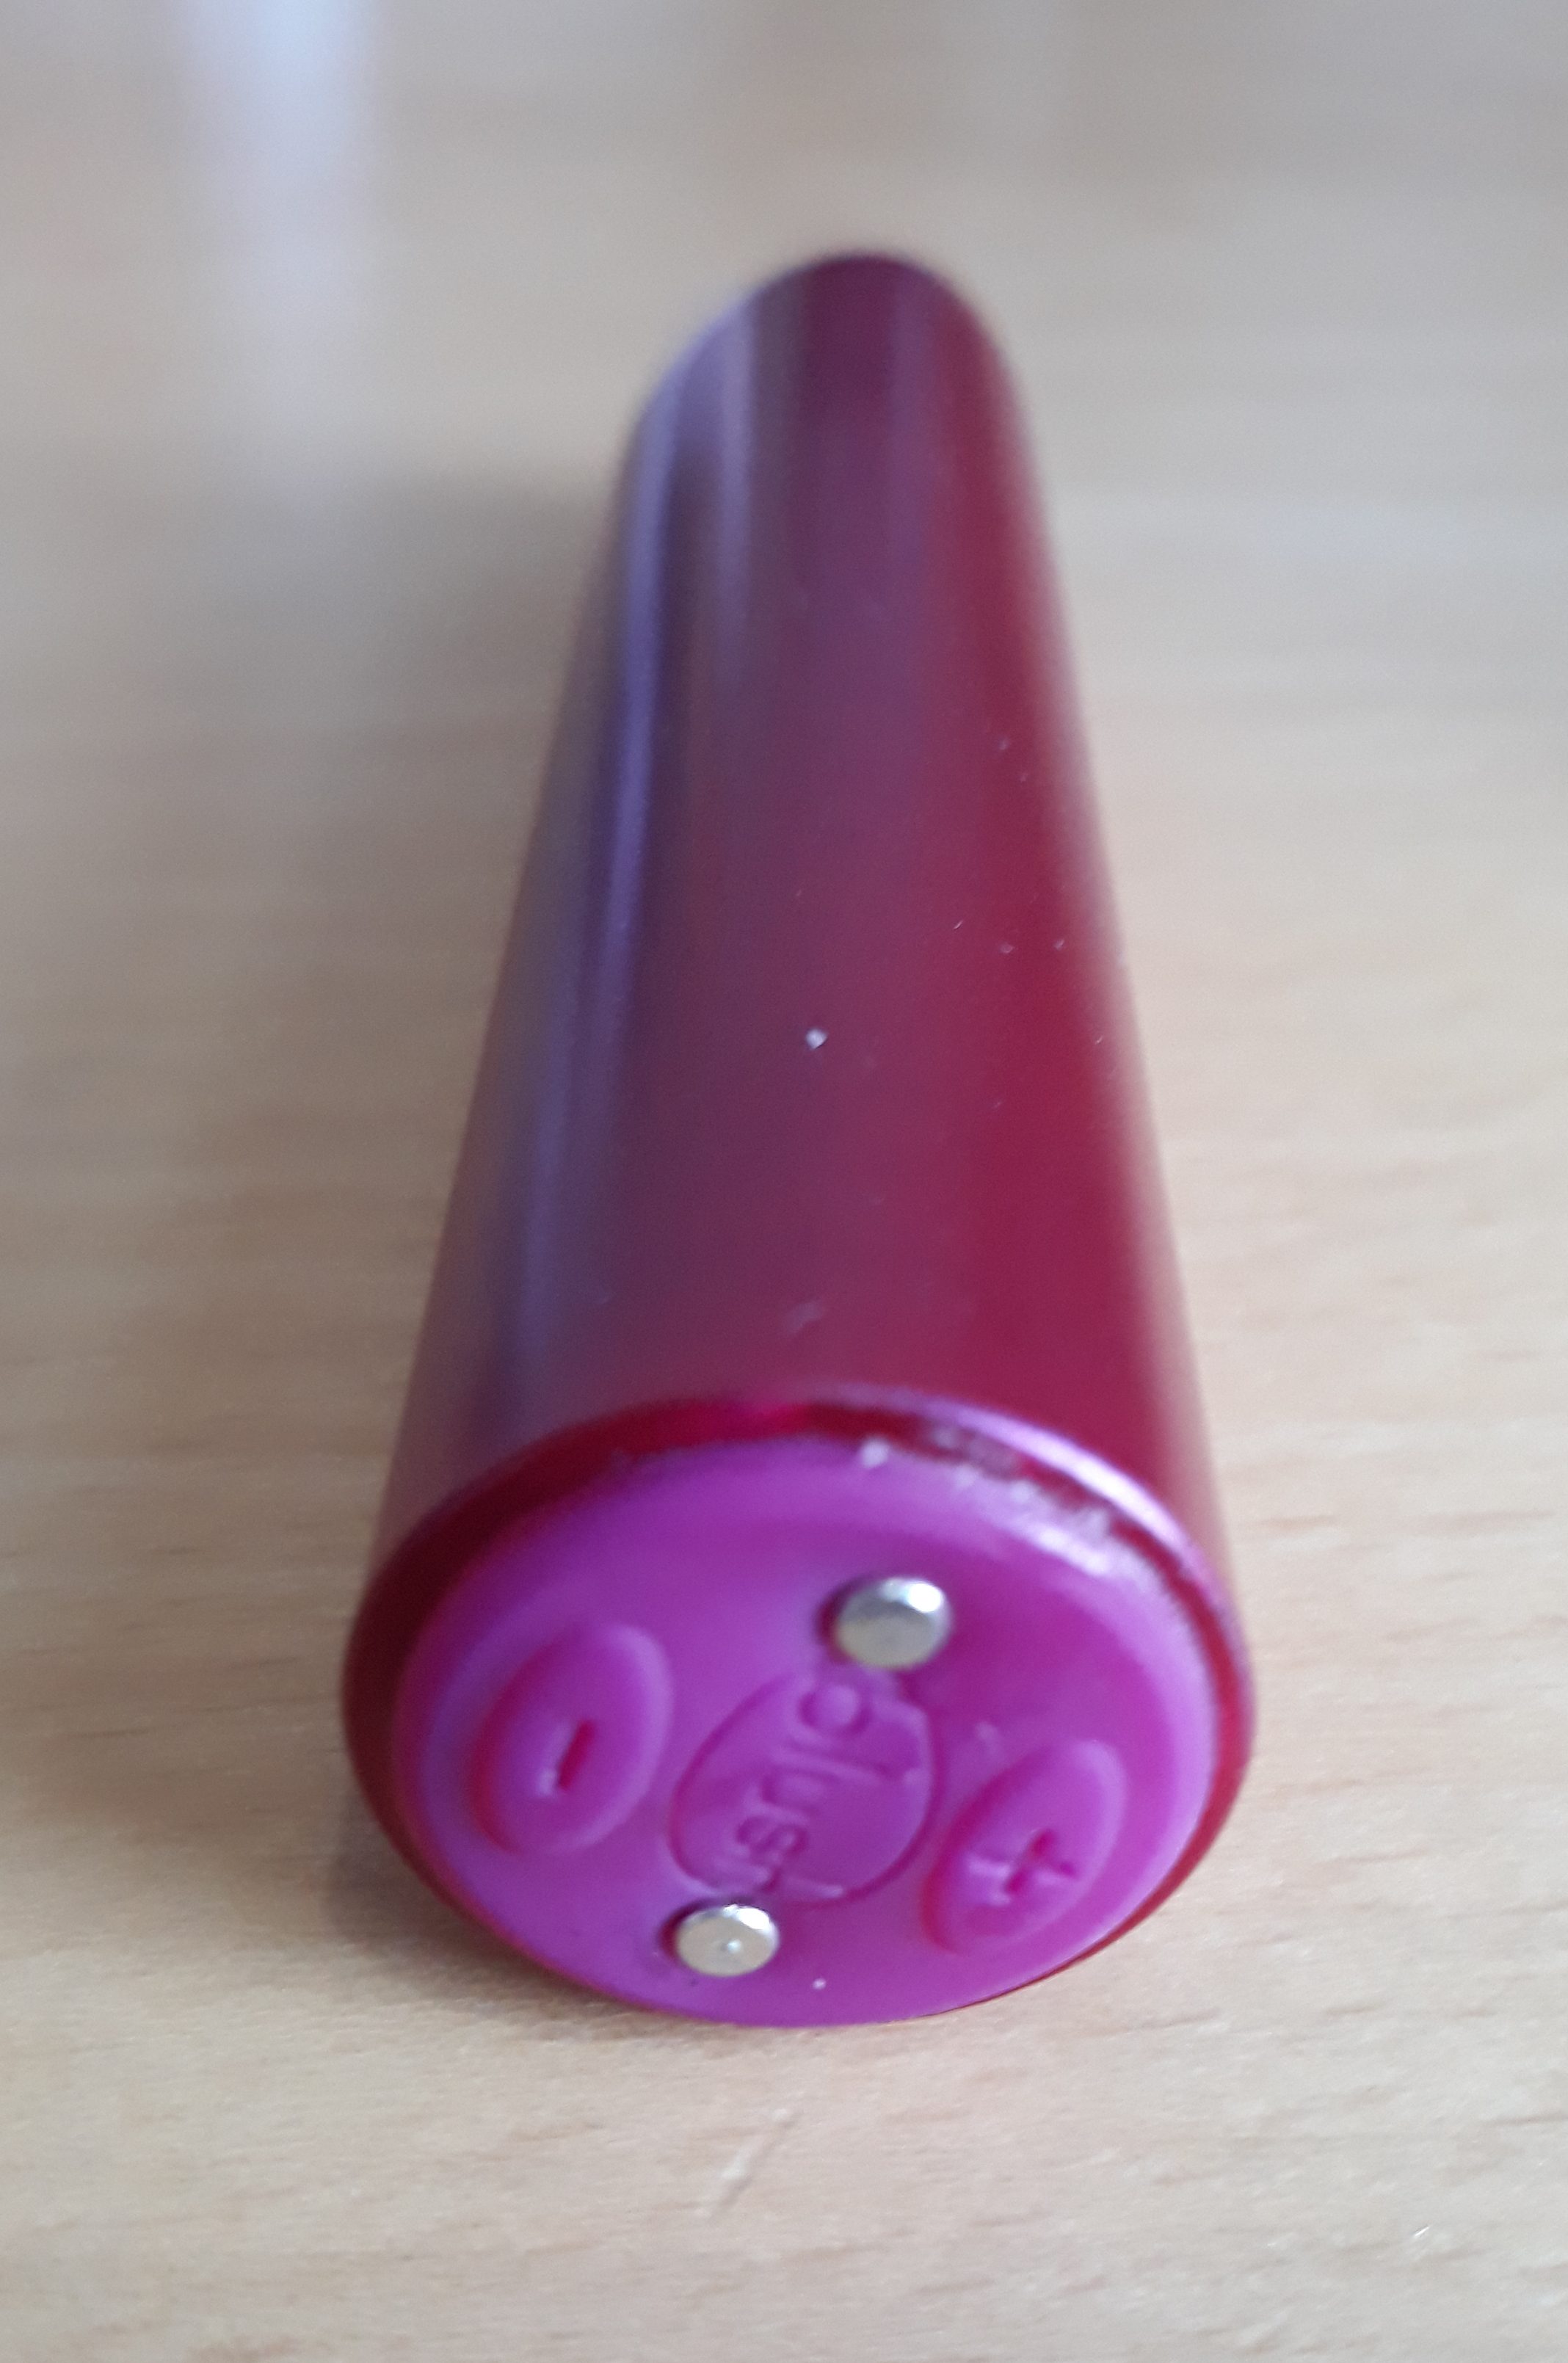 The Exposed Nocturnal lipstick bullet vibrator.